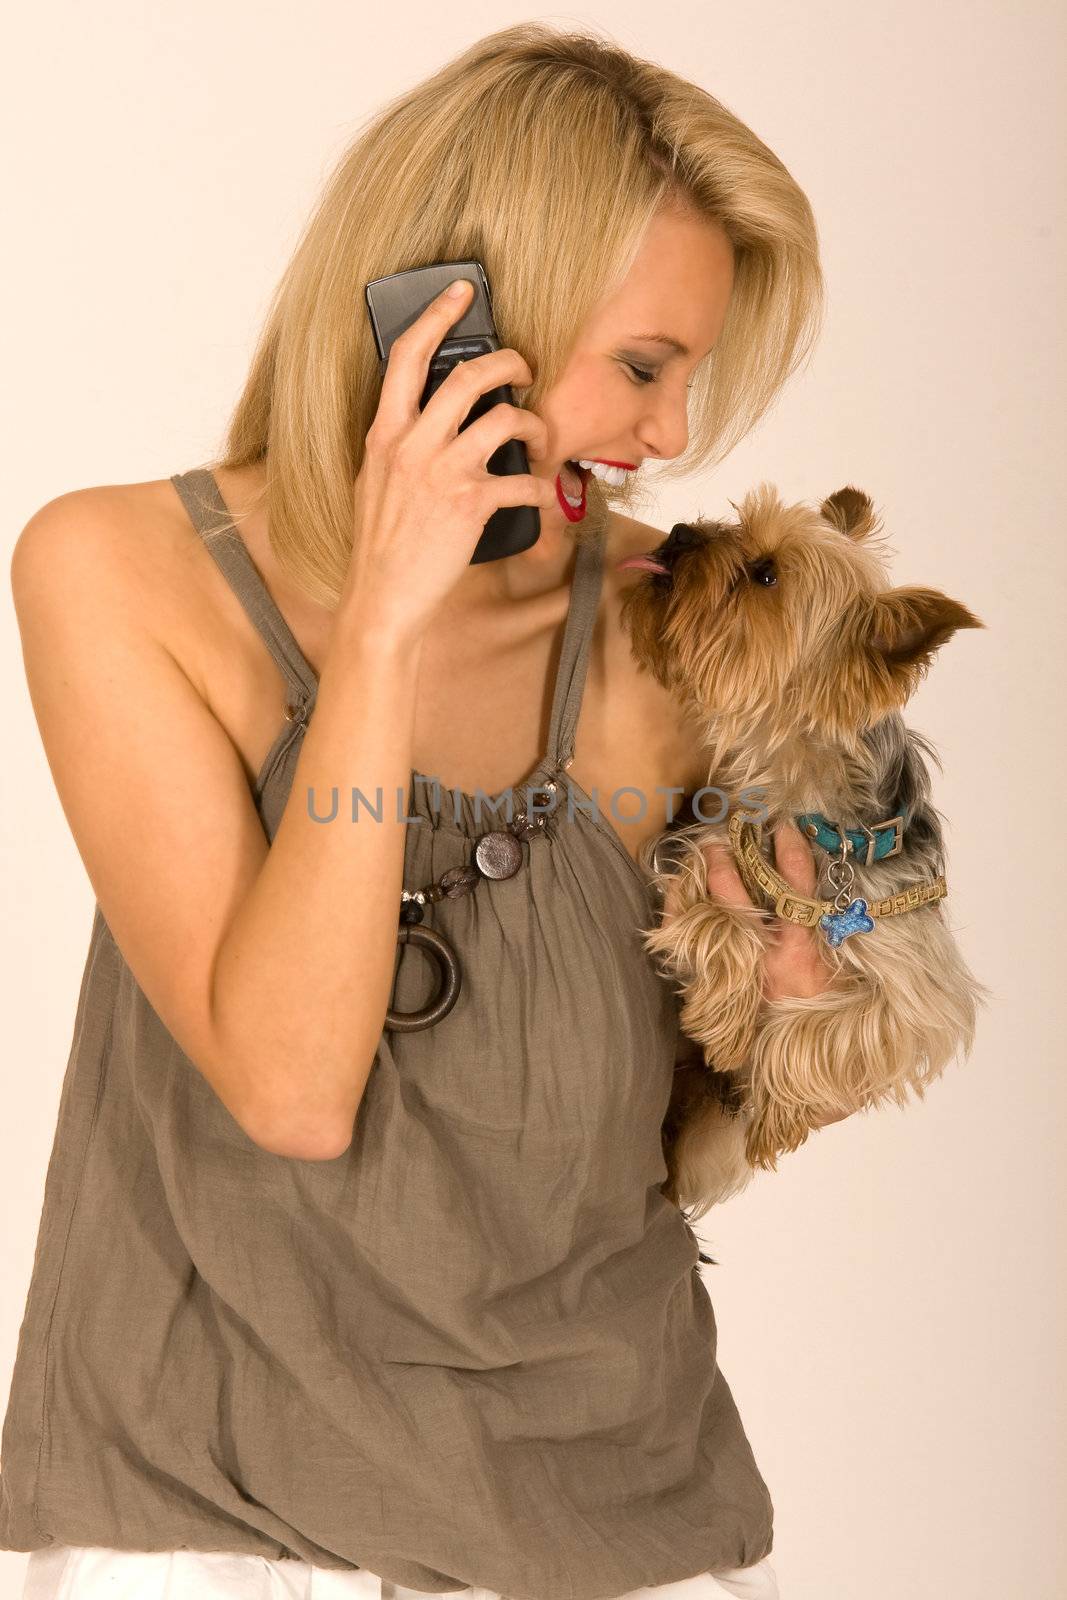 Woman with dog on the phone at arm